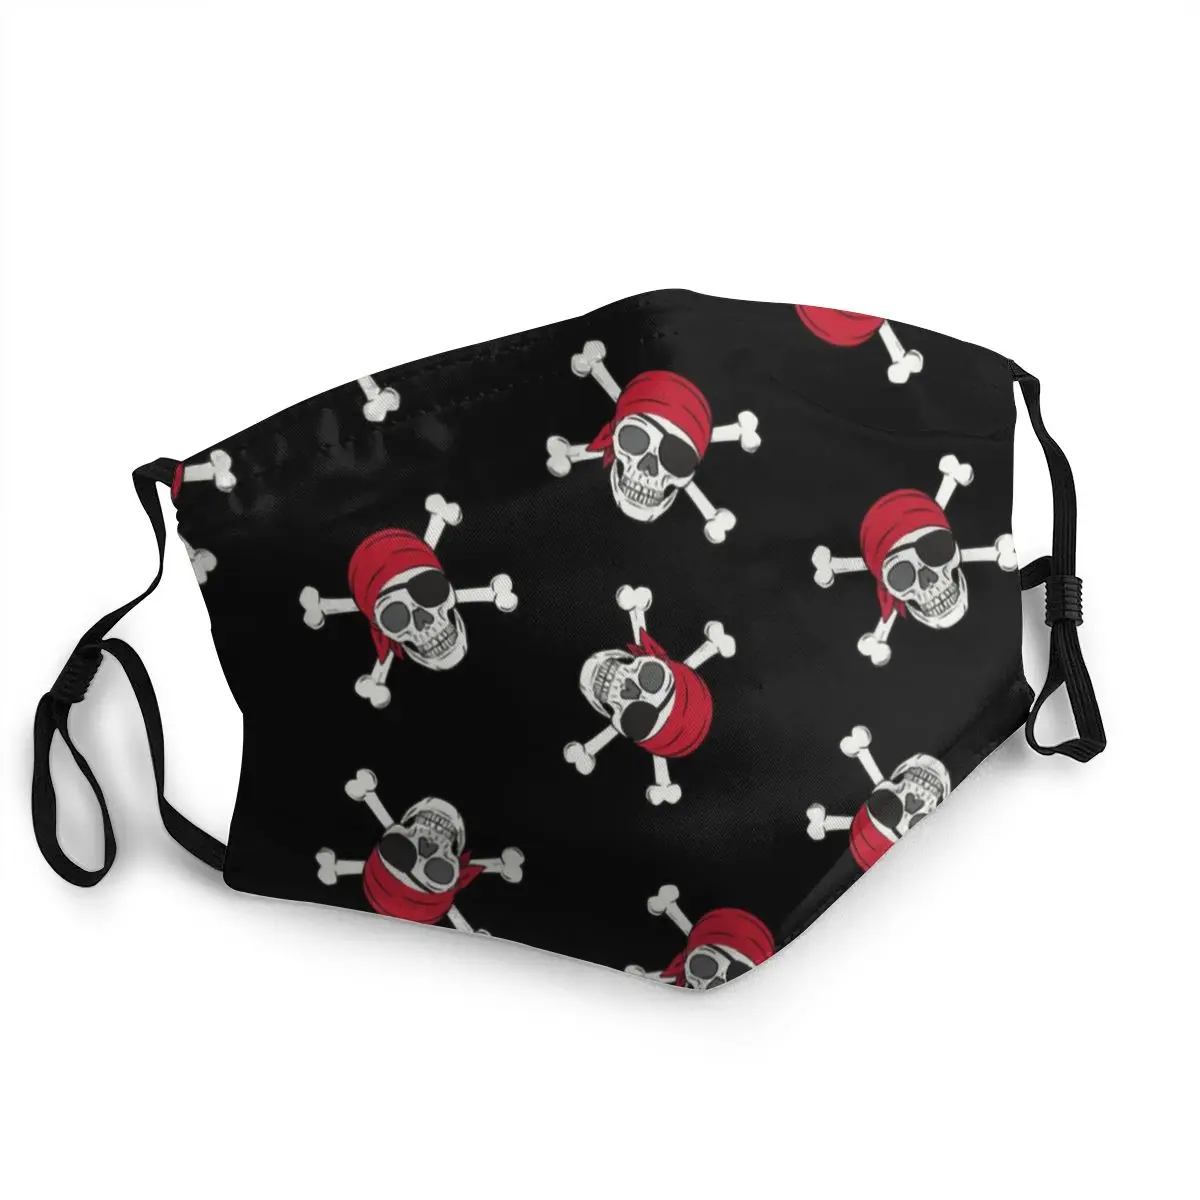 

Pirate Skulls Reusable Unisex Adult Face Mask Jolly Roger Anti Haze Dust Protection Cover Respirator Mouth Muffle